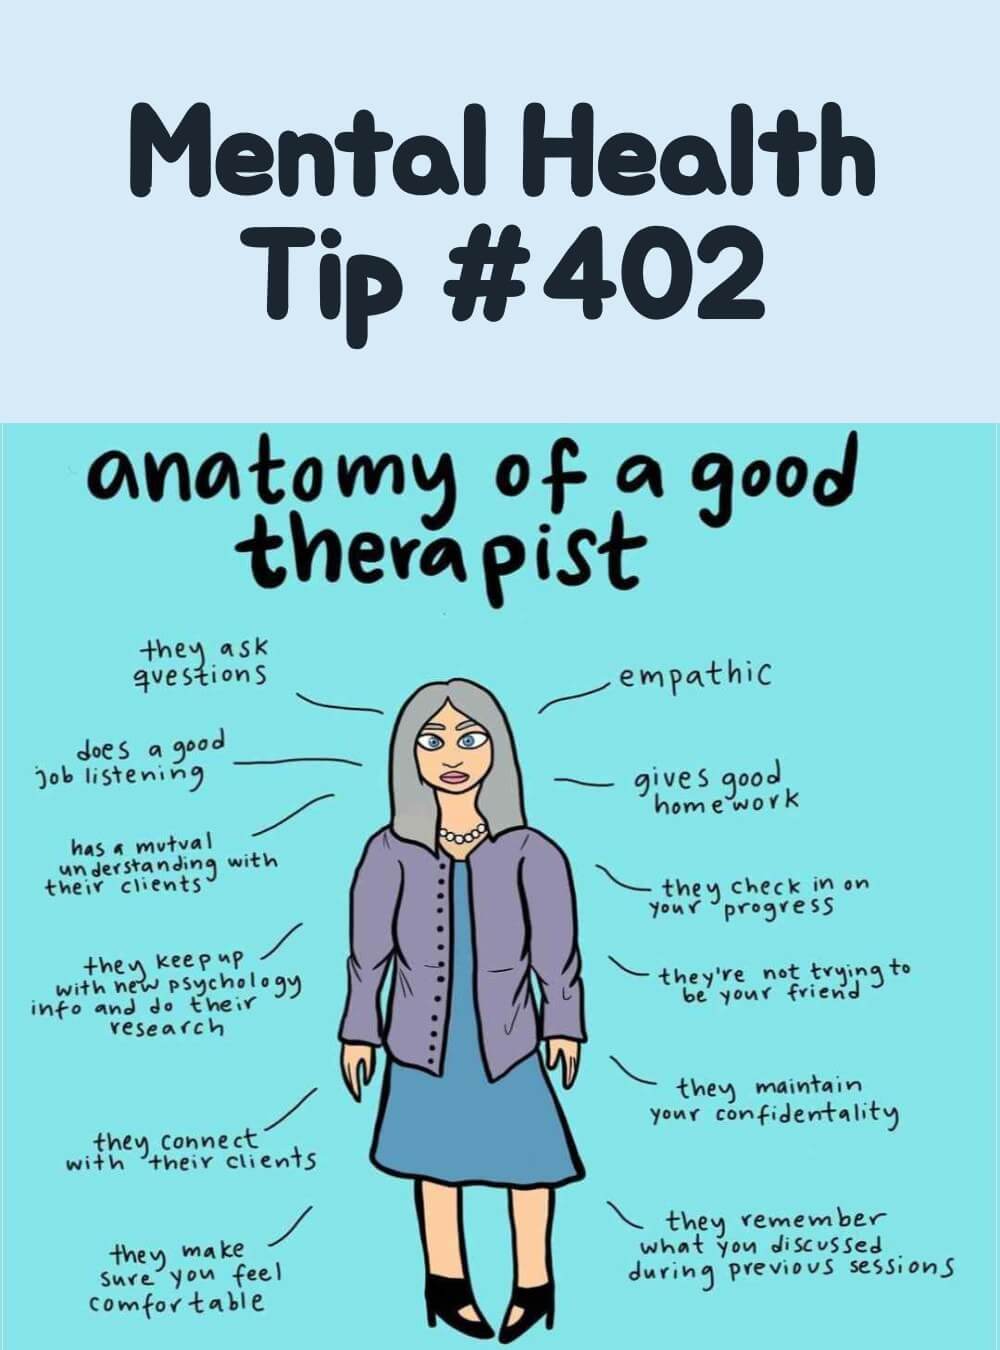 Emotional Well-being Infographic | Mental Health Tip #402